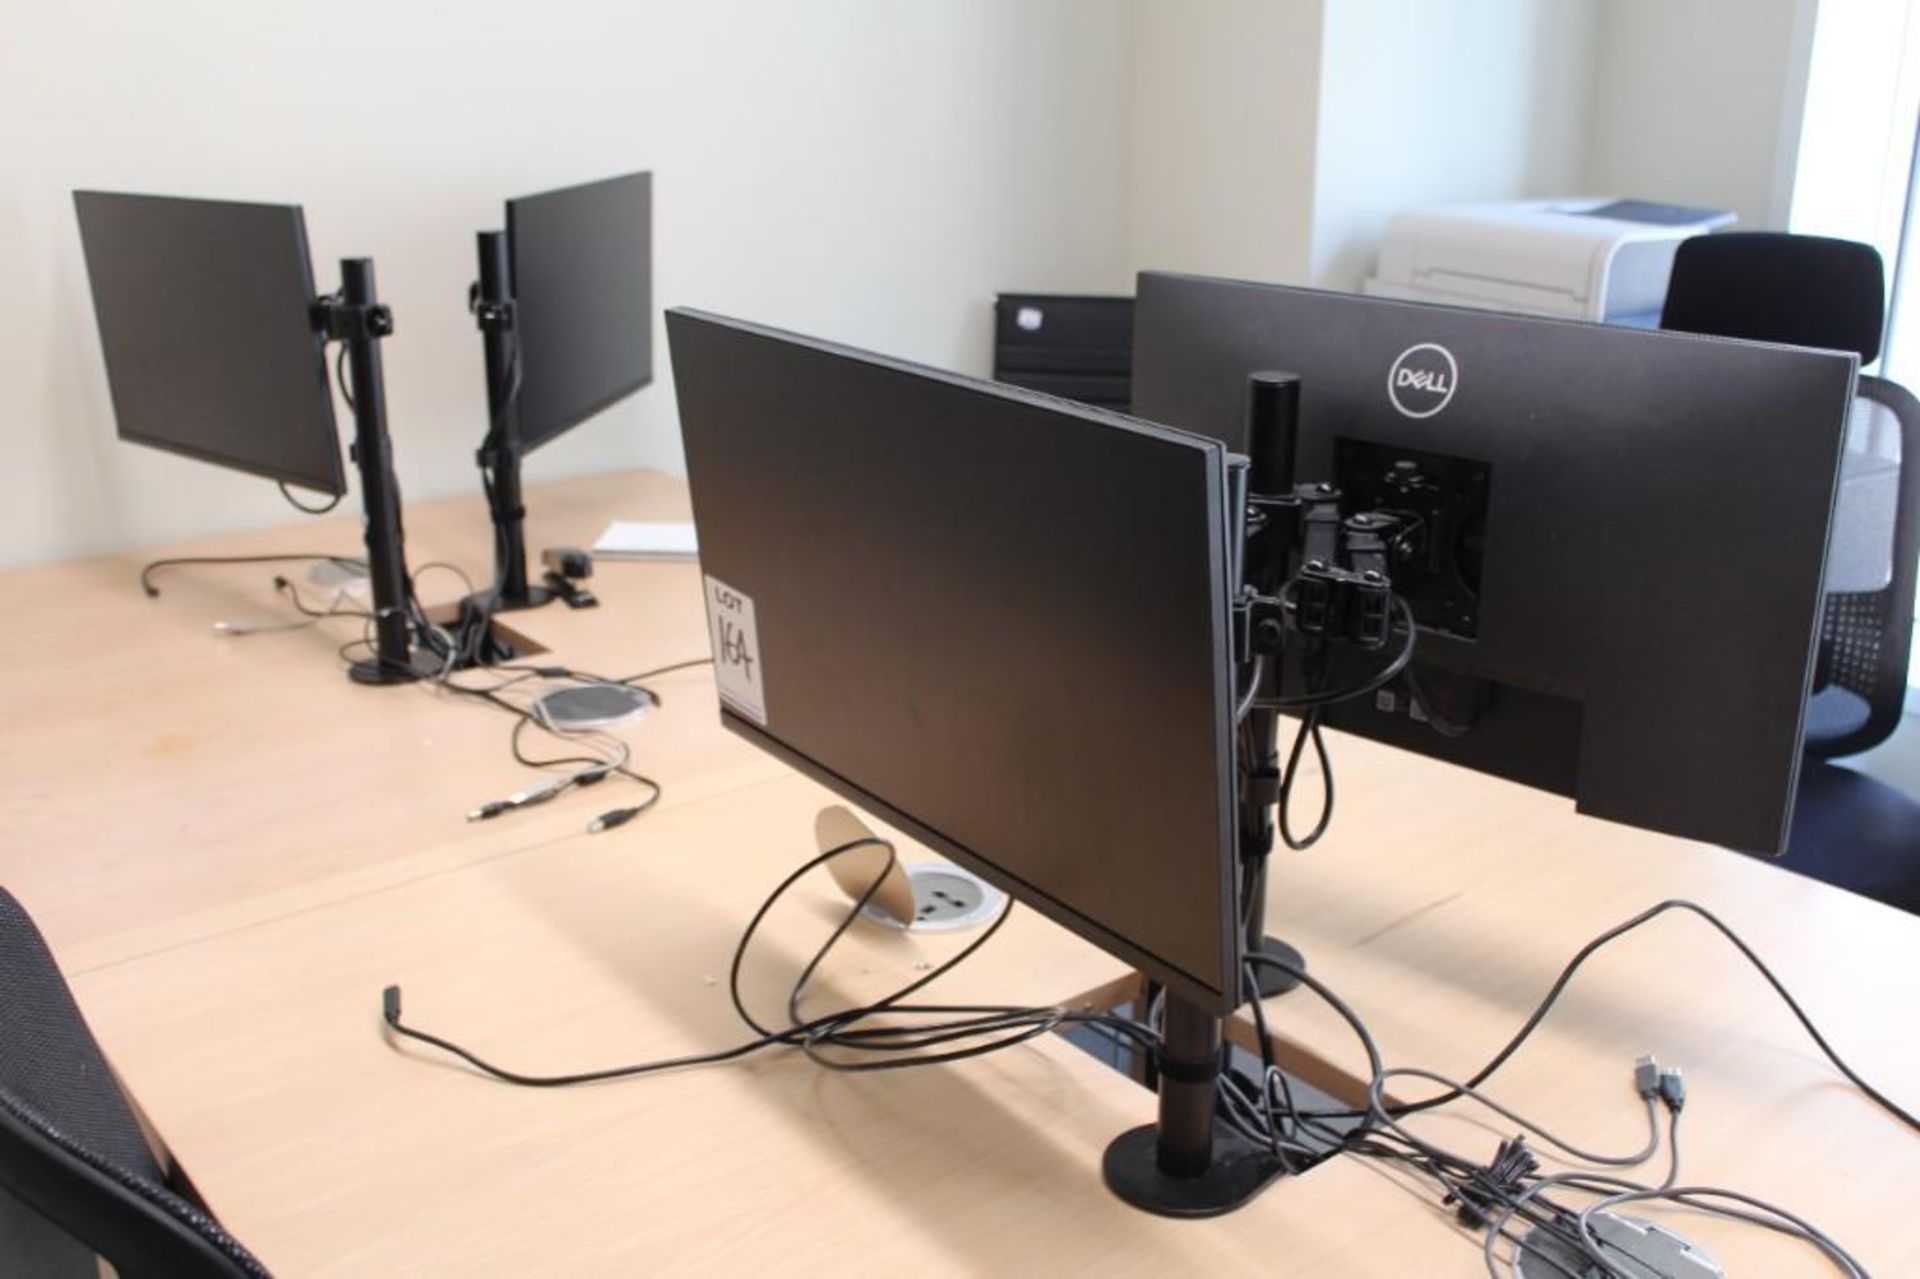 6x Dell 24 Inch Display screens with Manhattan arms